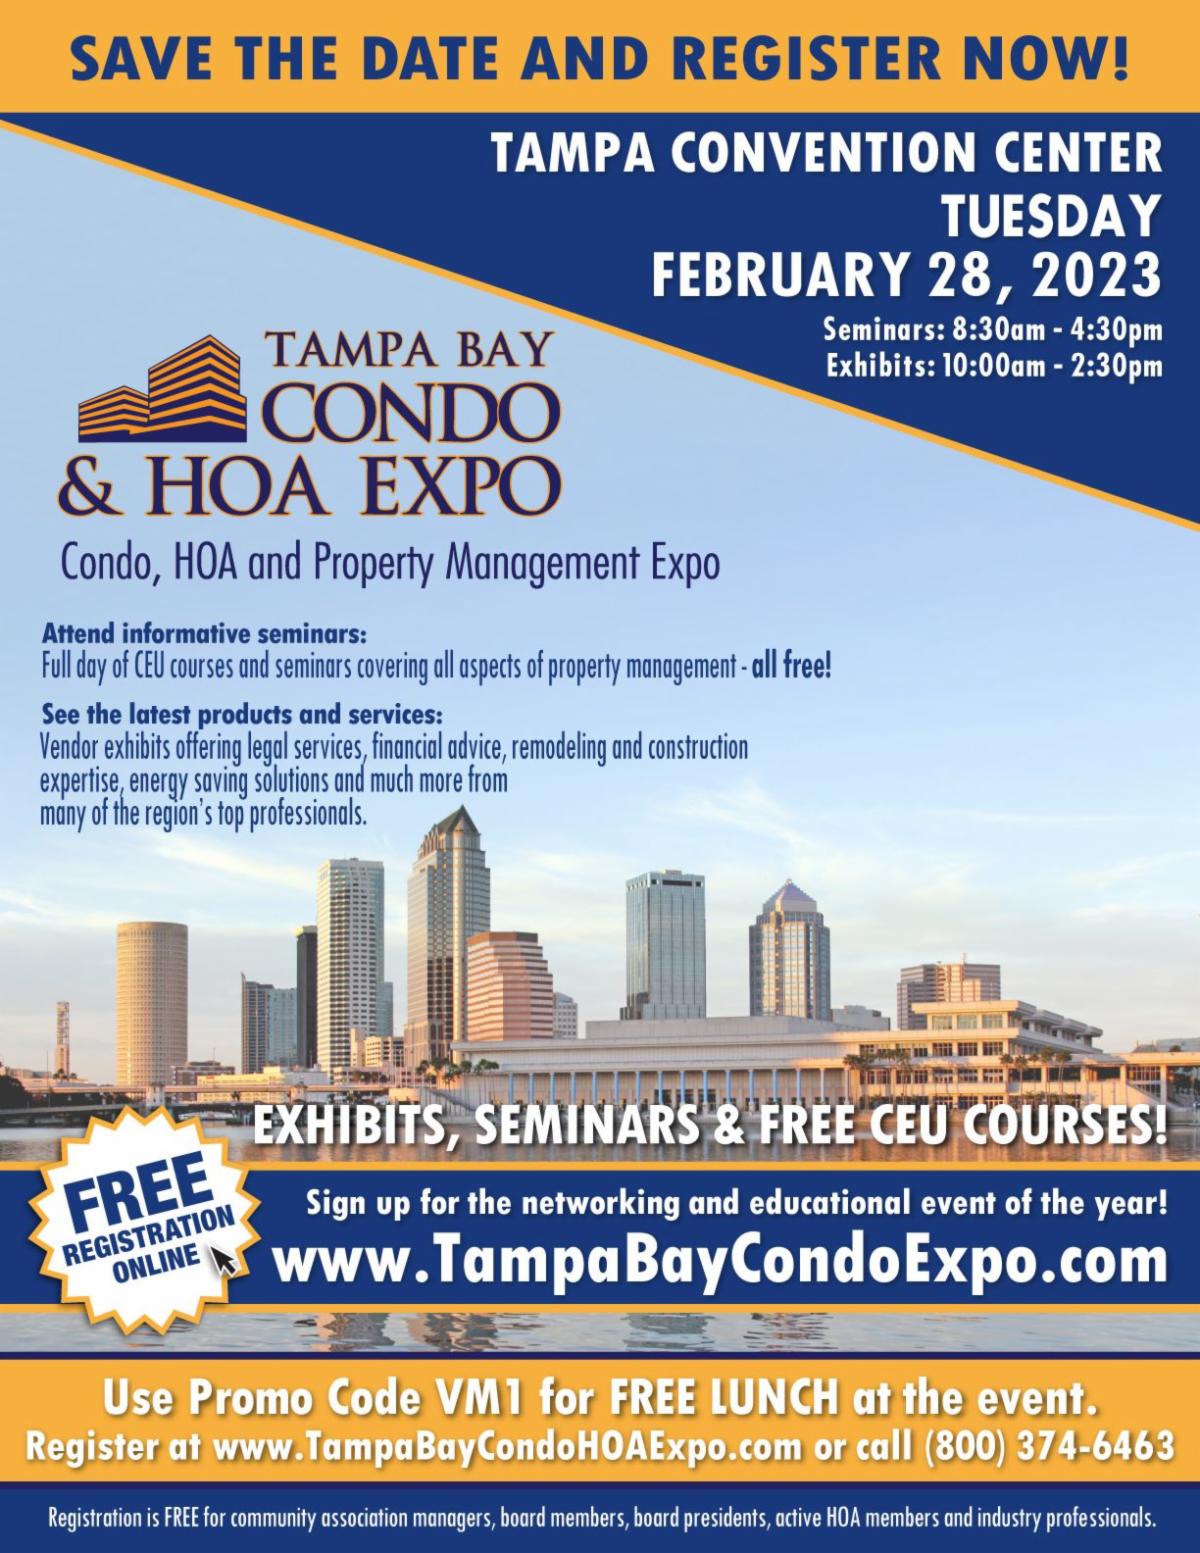 GET BOARD CERTIFIED AT THE “CONDO AND HOA EXPO” IN TAMPA FEB 28, 2023 * LUNCH IS PROVIDED FOR FREE!